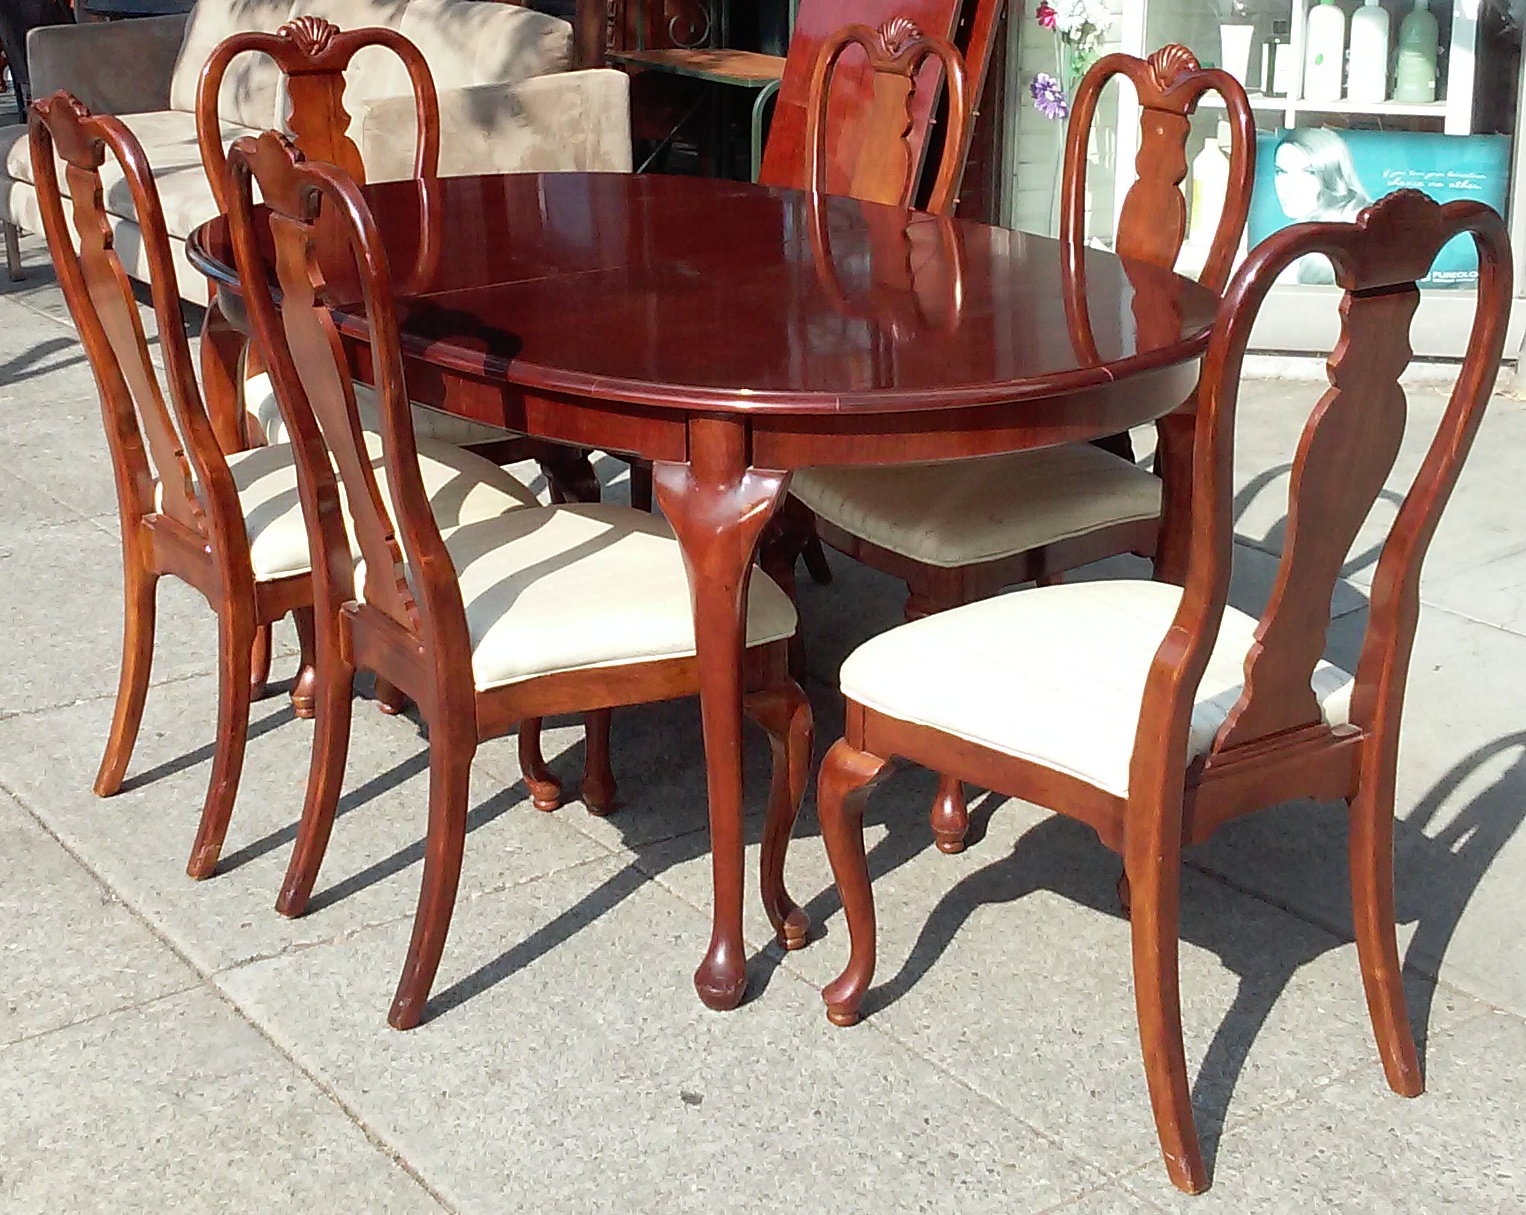 Used Cherry Dining Room Table And Chairs